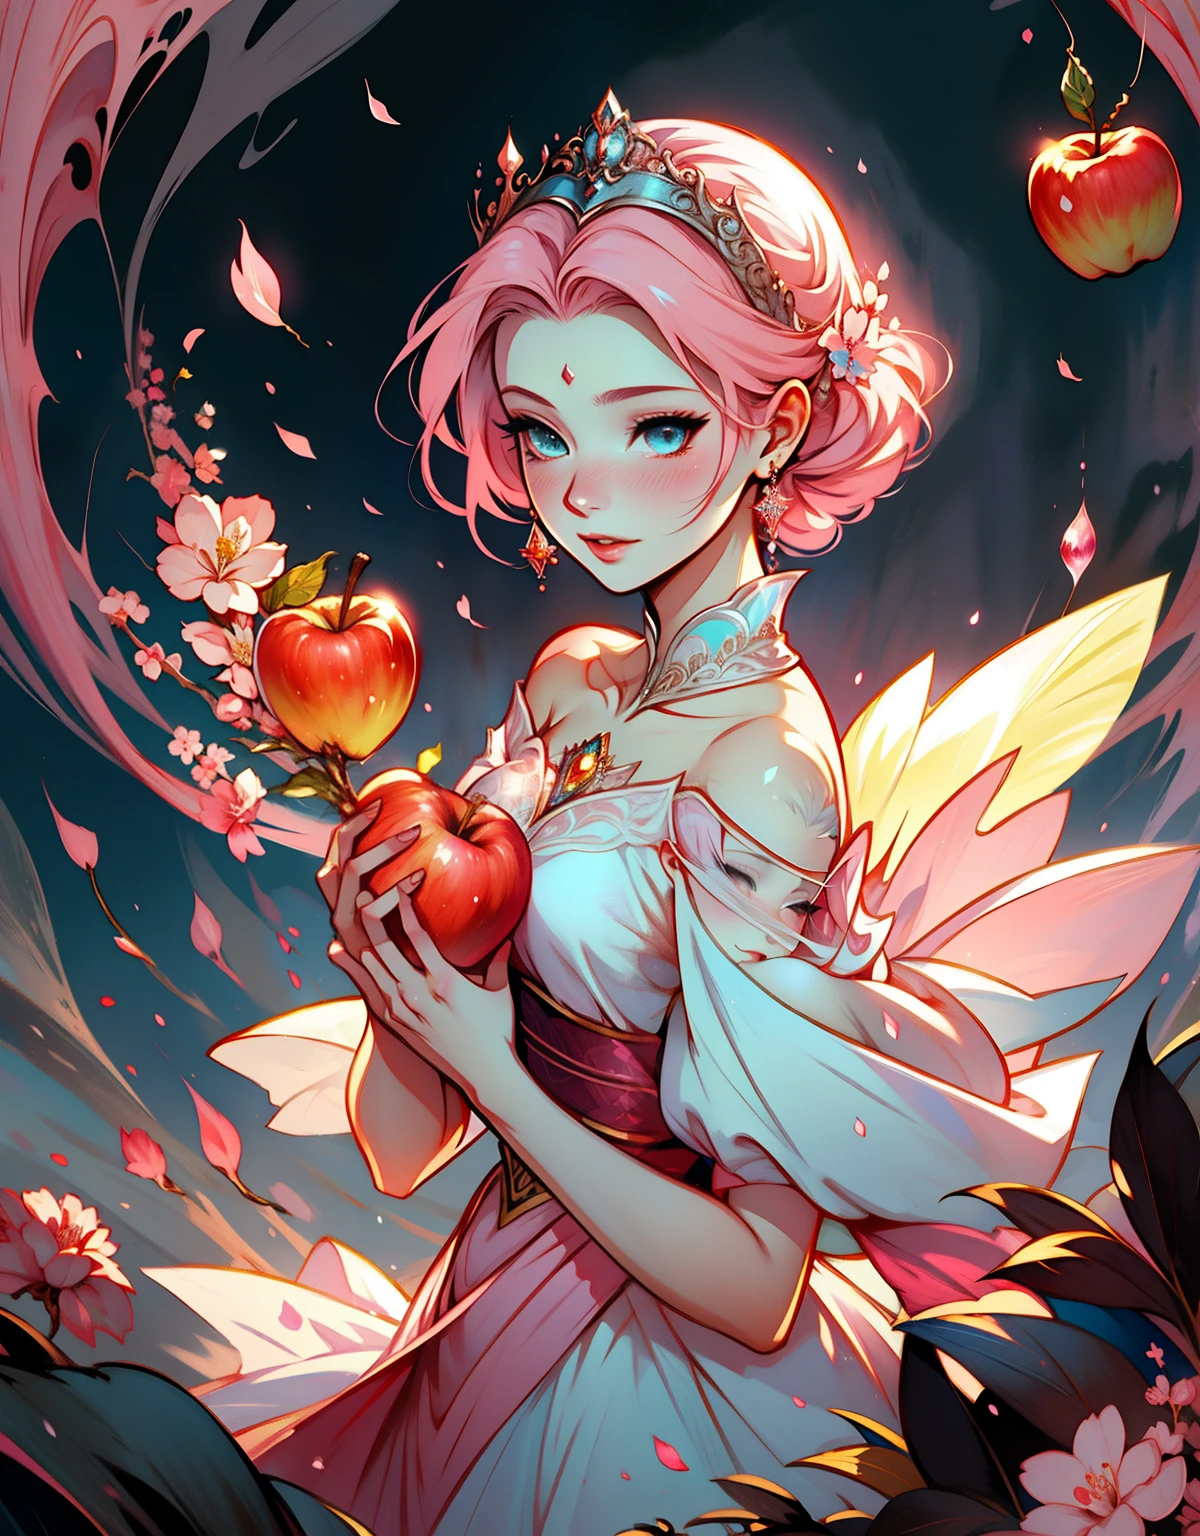 1womanl, dressed up as snow white, strong emotions, sakura,pink hair,  shorth hair, Lumiere, focusing, como branca de neve, fully body, 独奏, magic around you. illustration! from head to toe, blue and yellow dress, Holding an apple